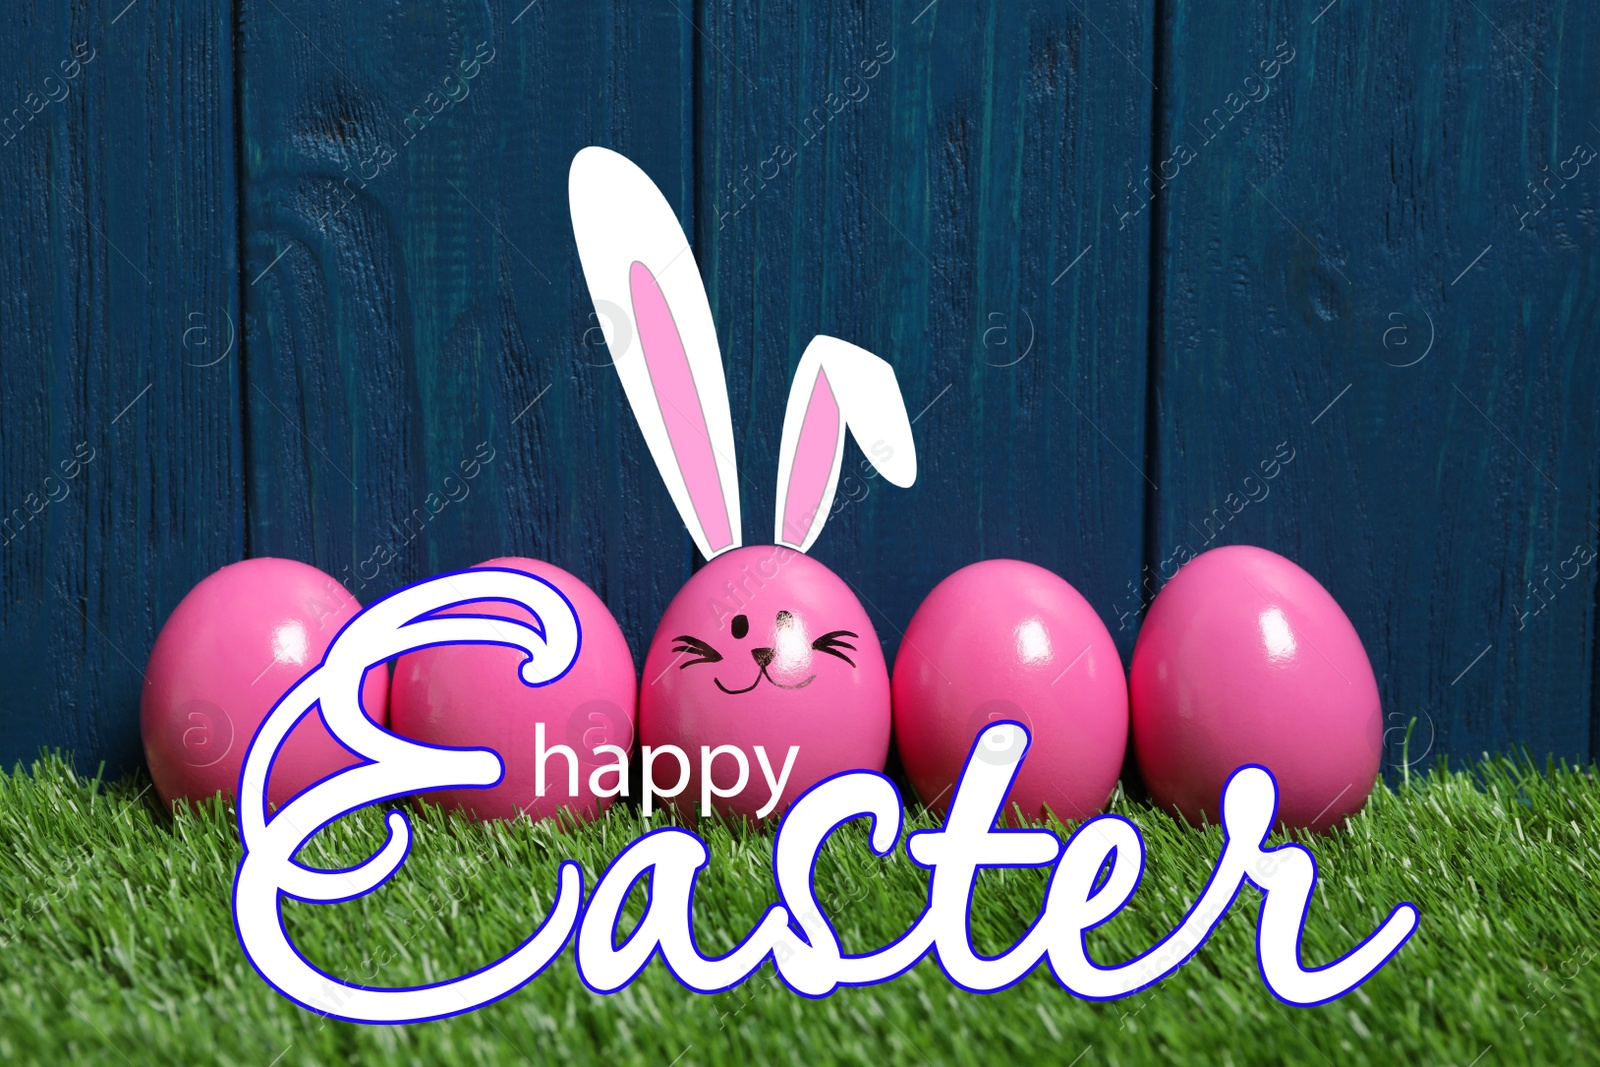 Image of Happy Easter. One egg with drawn face and ears as bunny among others on green grass against blue wooden background